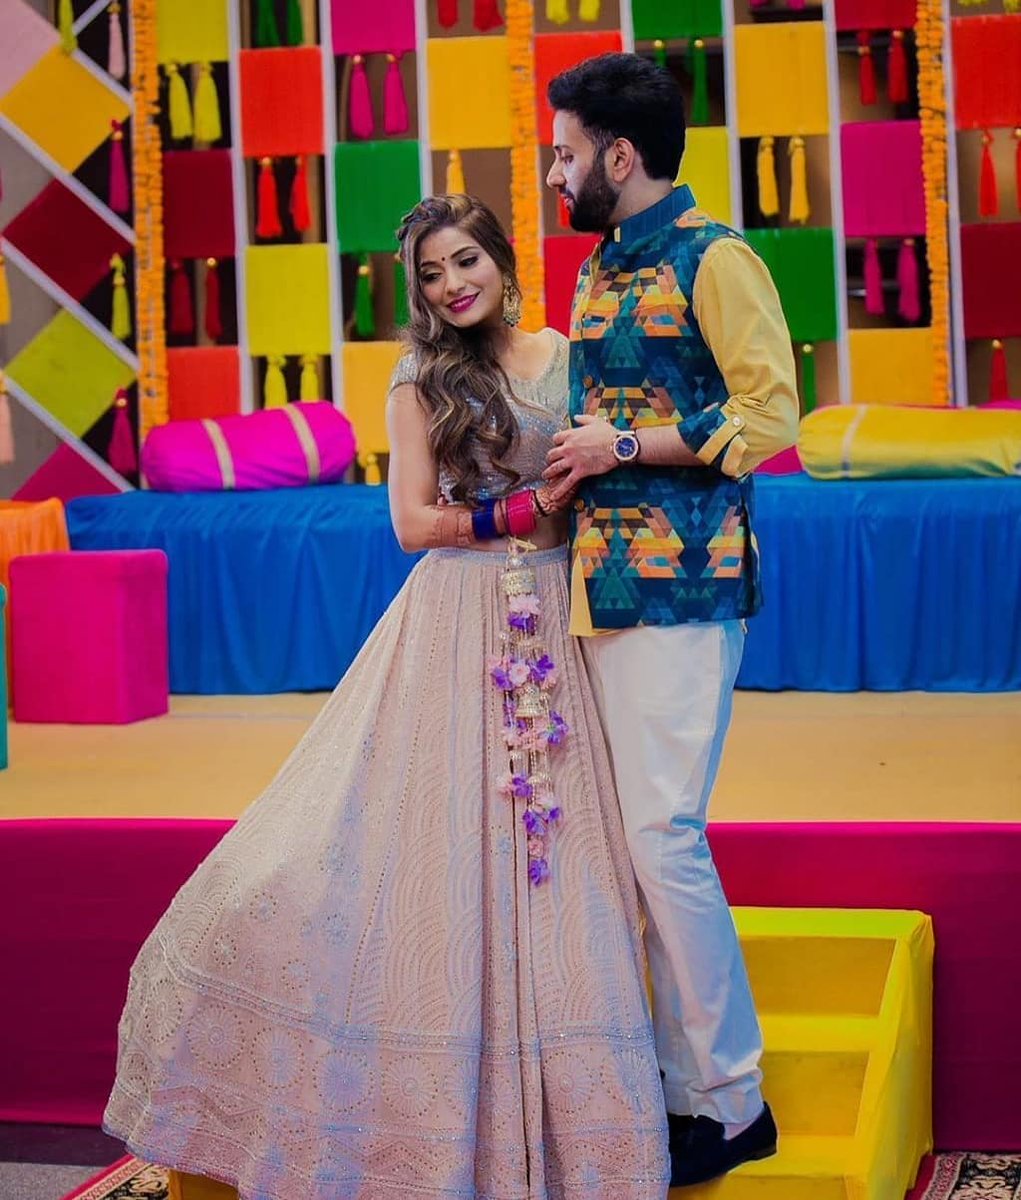 Throwback To @dollyouup_bys Bridey Being Caught In Her Candid Best At Her Mehndi ♥️
.
.
Hair by @ritikahairstylist
@recall_pictures @silkykothari1137
.
.
#weddingzworld #couple #couplegoals #couplephotography #coupleposes #weddinginspo #weddings #indianweddings #wedmegood